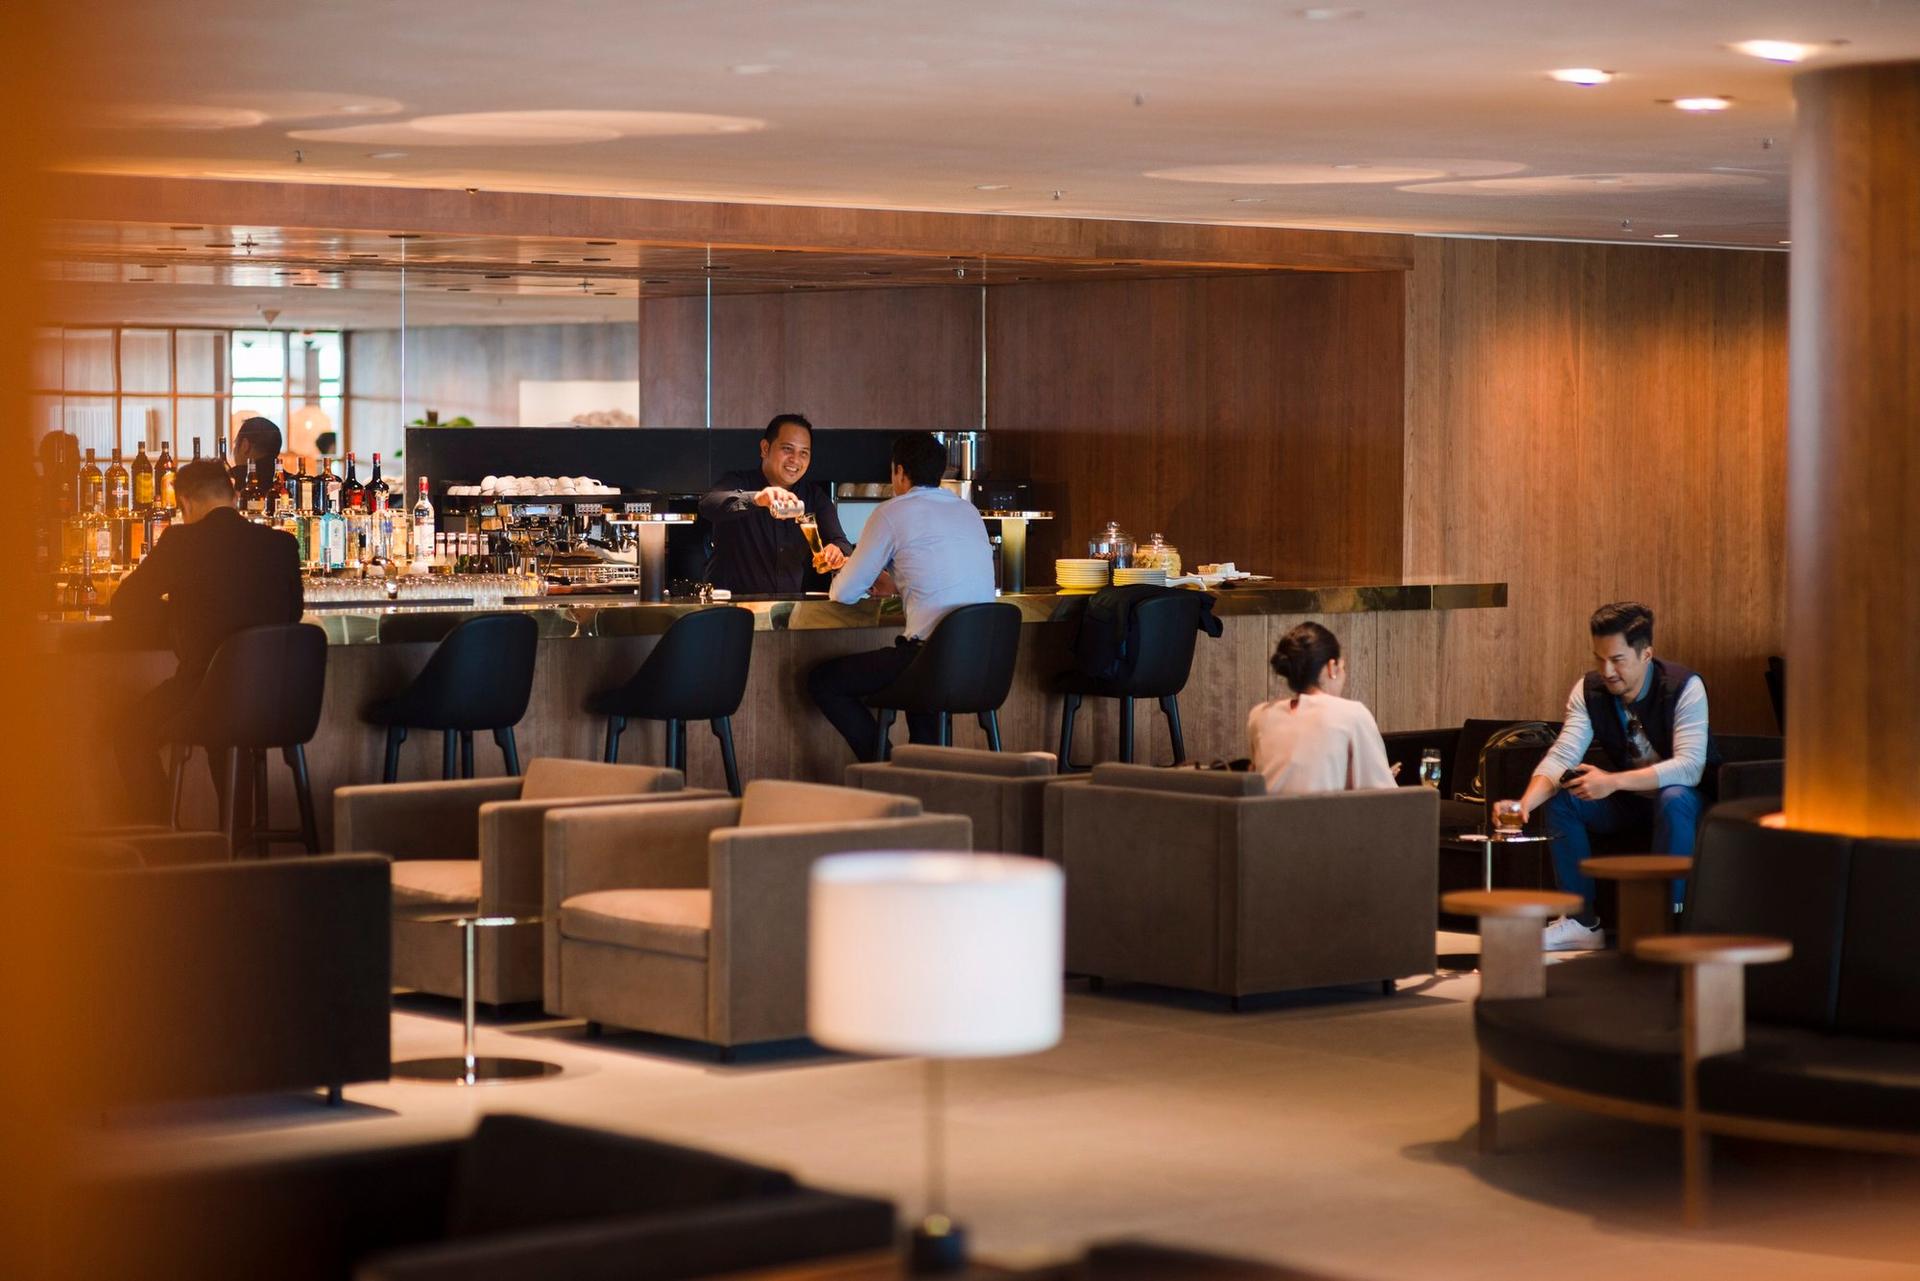 Cathay Pacific The Pier Business Class Lounge image 10 of 61